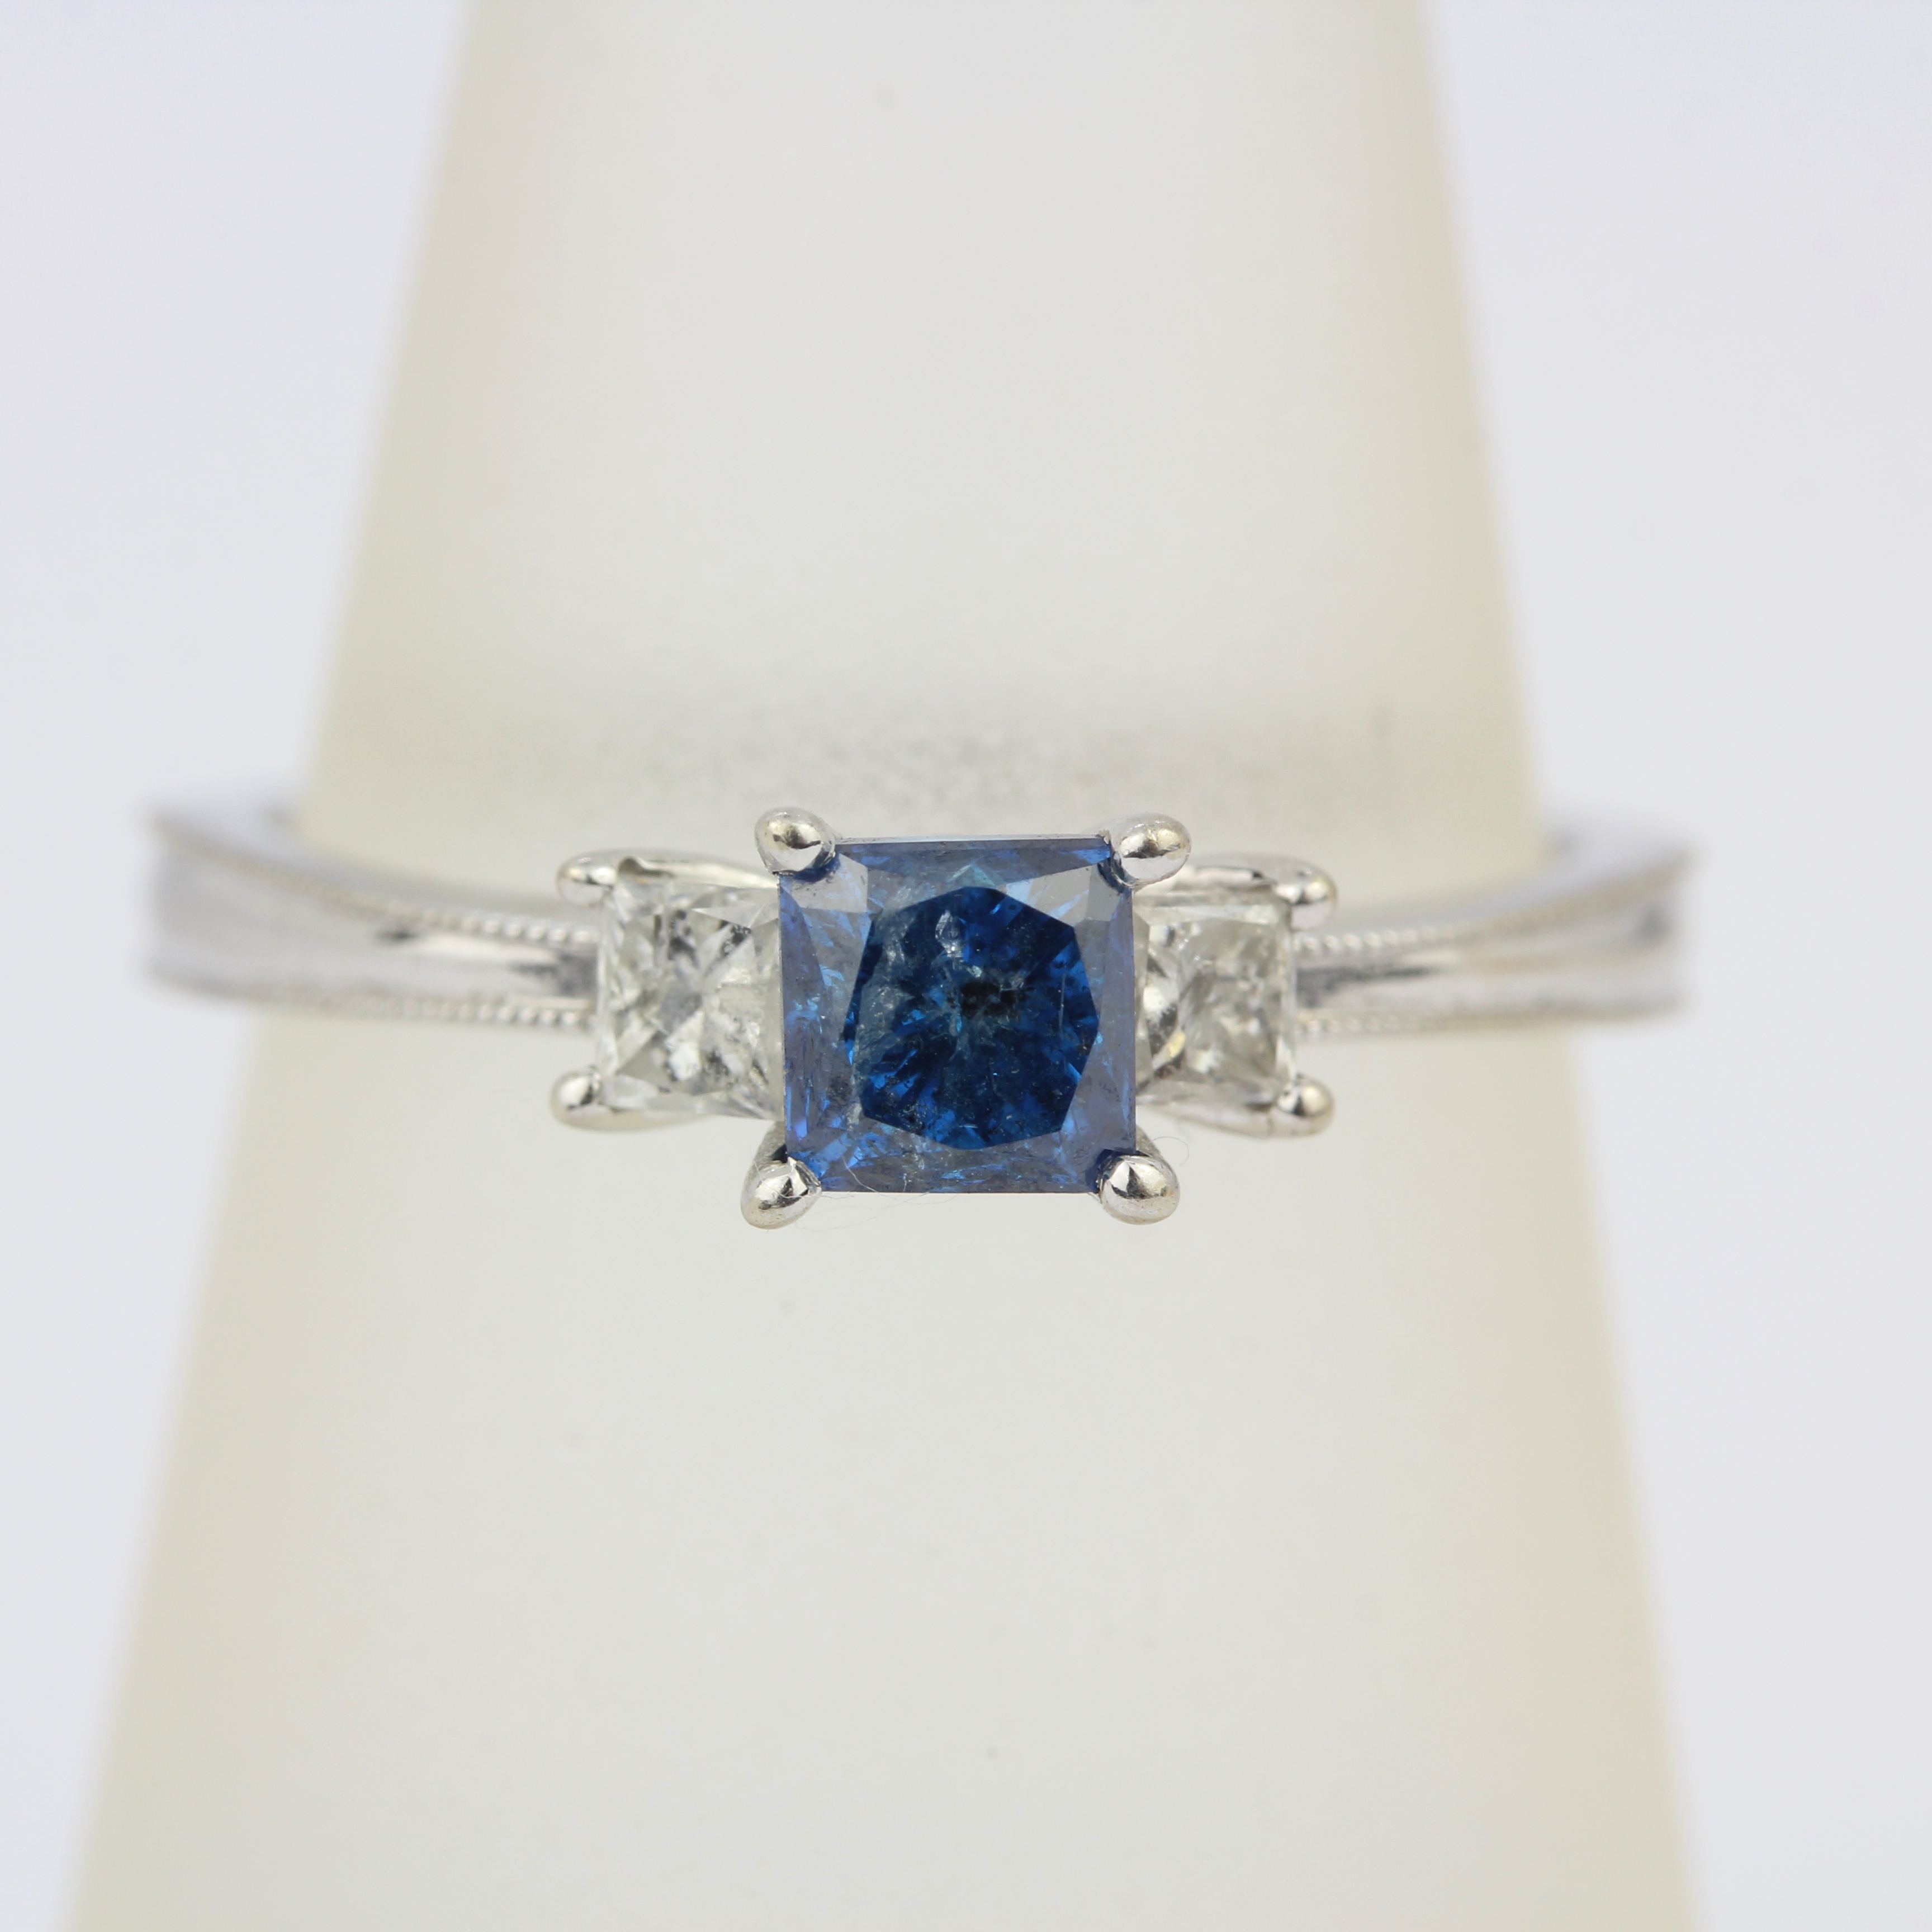 A 14ct white gold ring set with a princess cut fancy blue diamond and princess cut diamond set